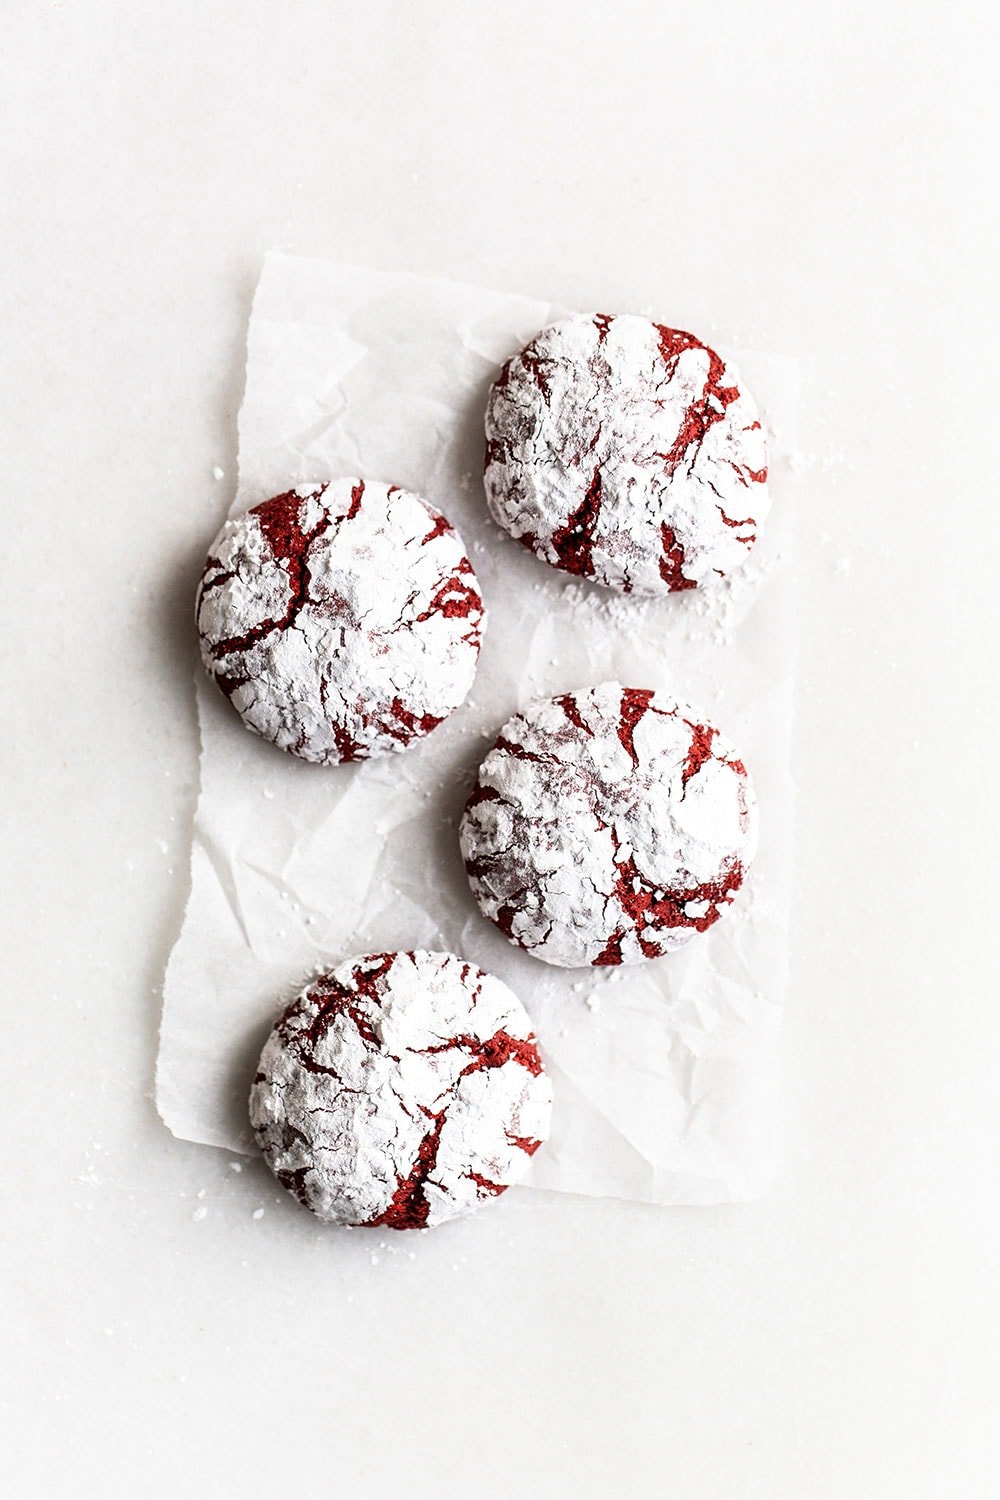 Red velvet crinkle cookies on parchment paper with a snowy coating of powdered sugar